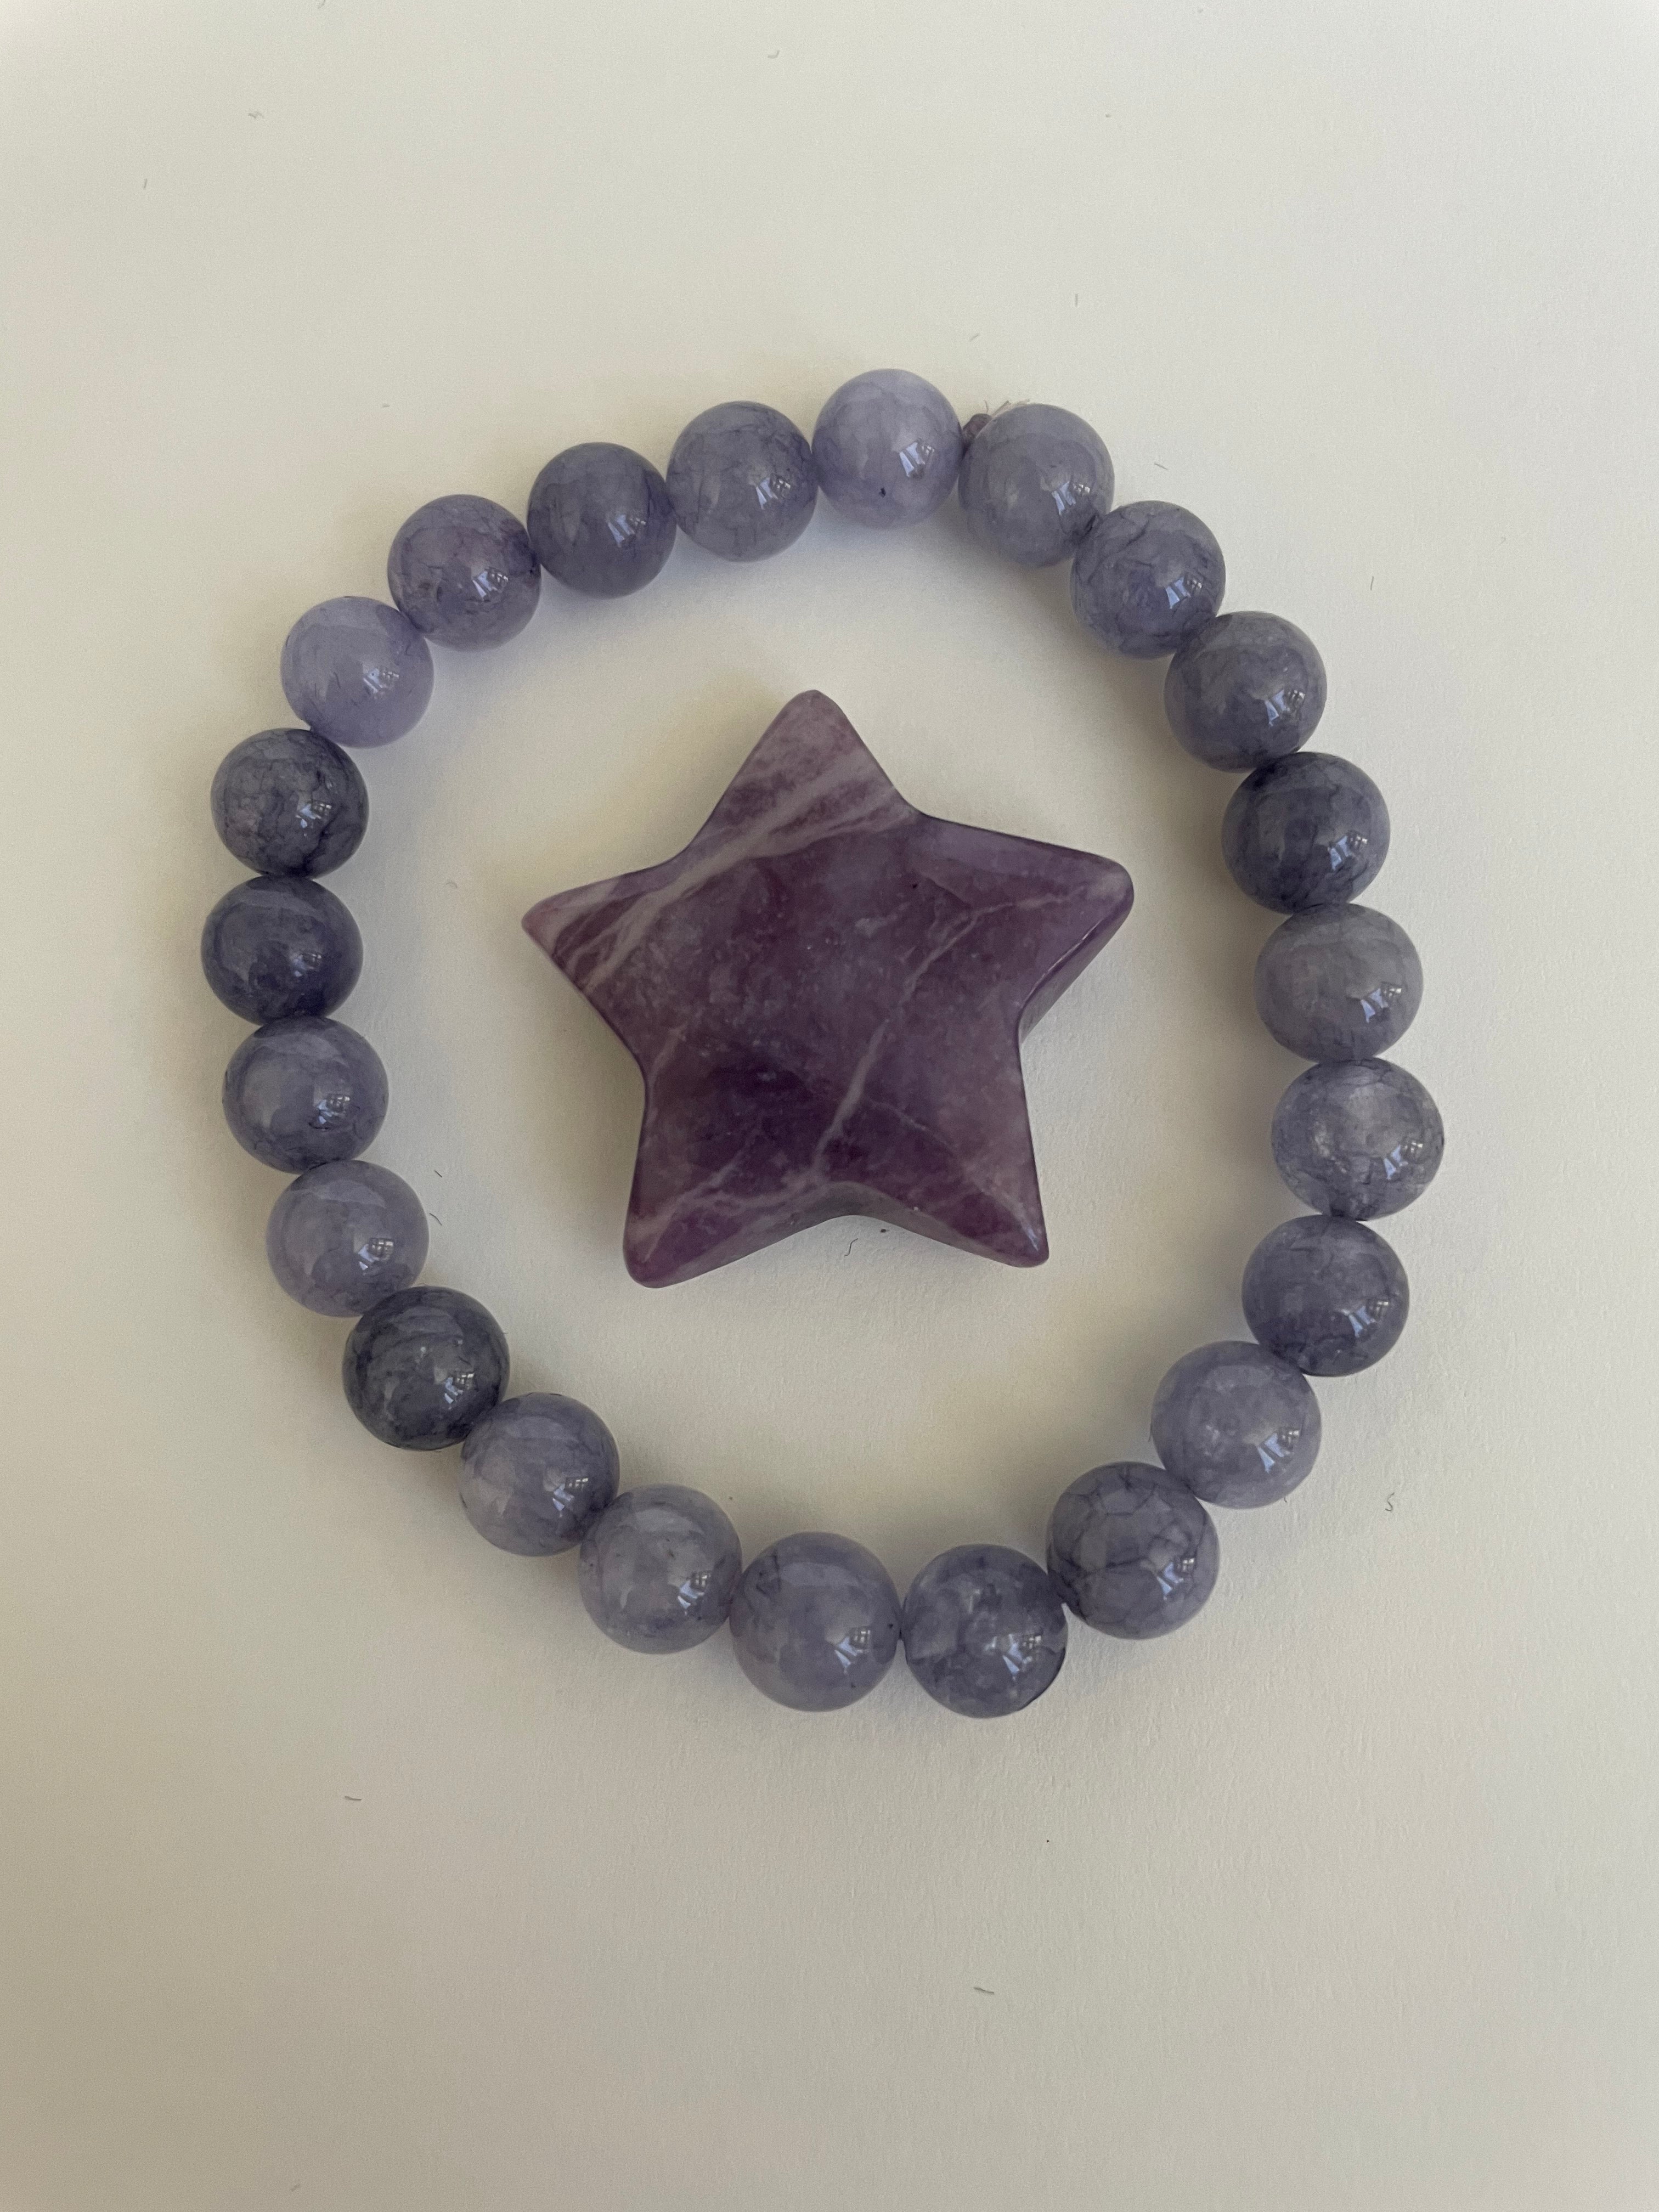 This lovely little Lepidolite star can be used for meditation, healing, for your altar, on your computer to clear EMRs, or as décor for any room in your home or office. Easy to slip right into your pocket so you can take the energy of lepidolite everywhere you go. Approximately 1¼". Cost is $6.